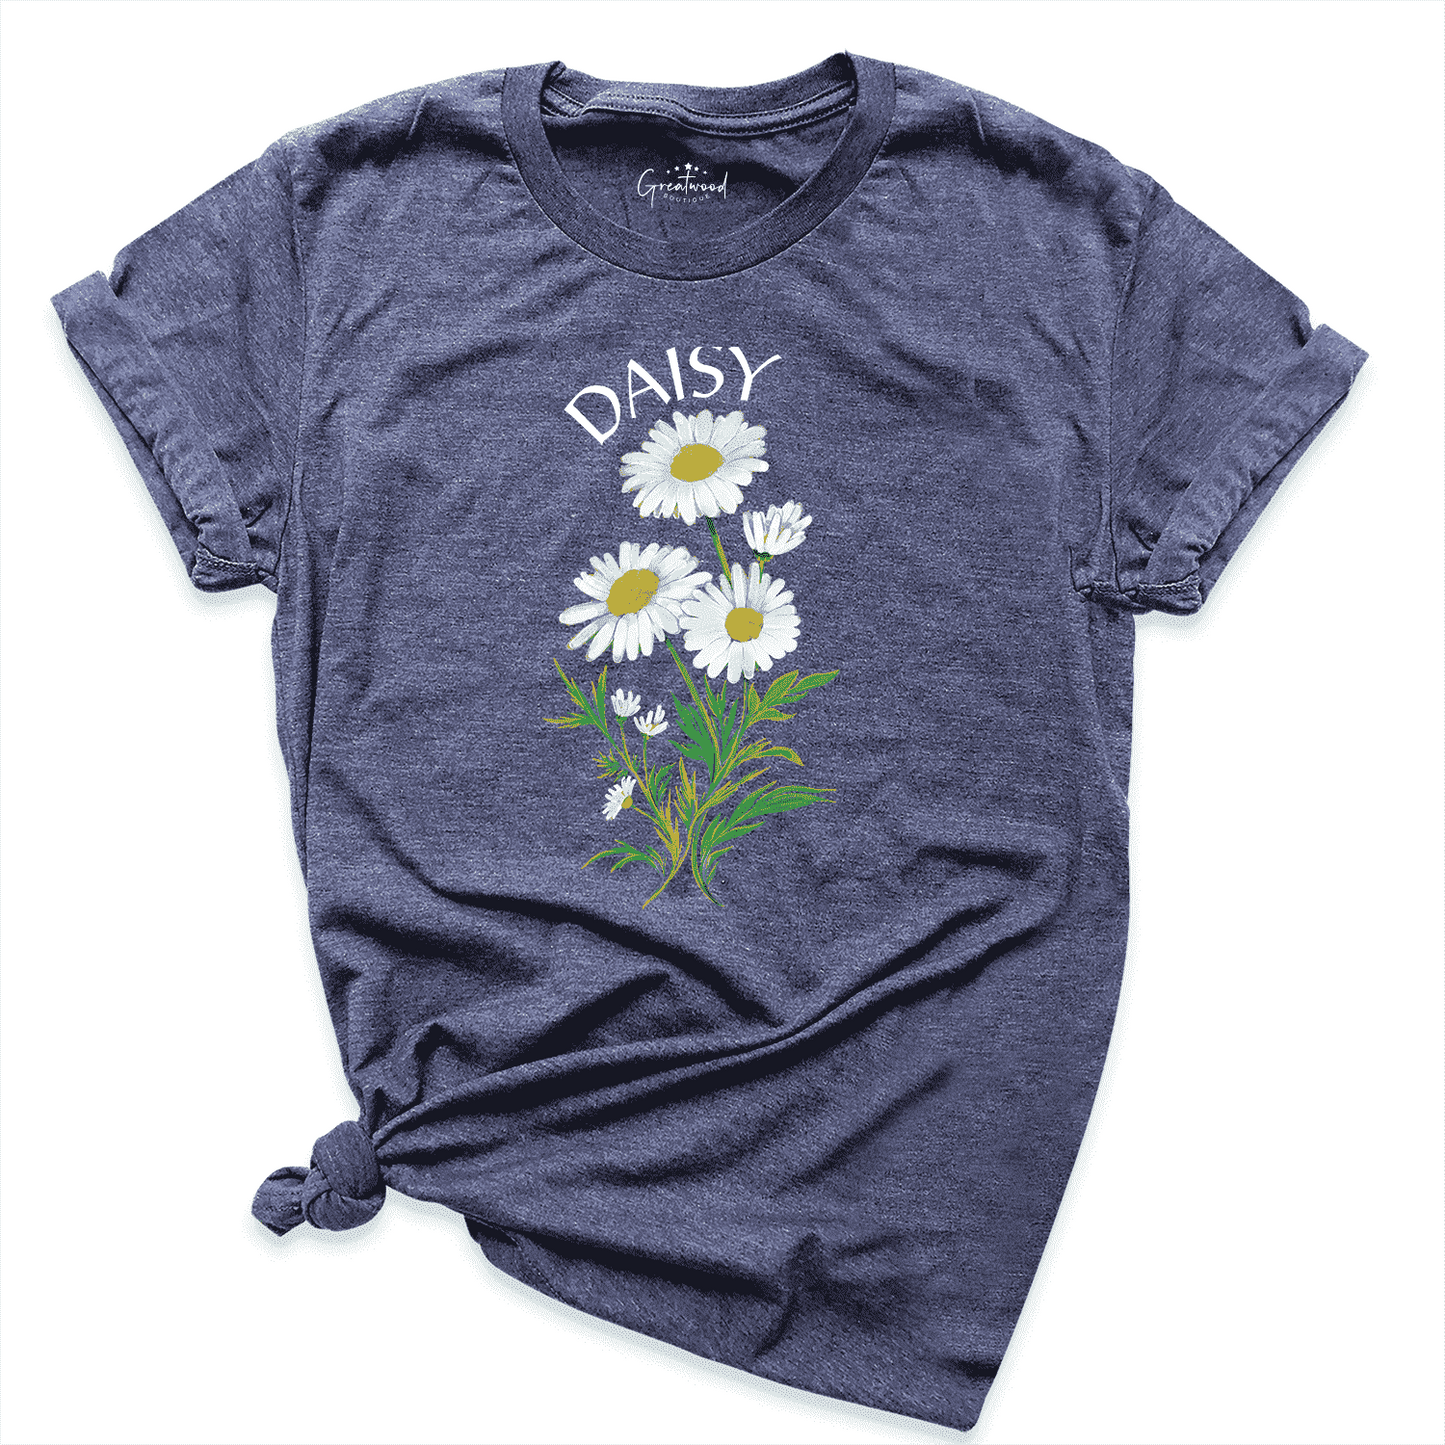 April Birth Flower Shirt Navy - Greatwood Boutique